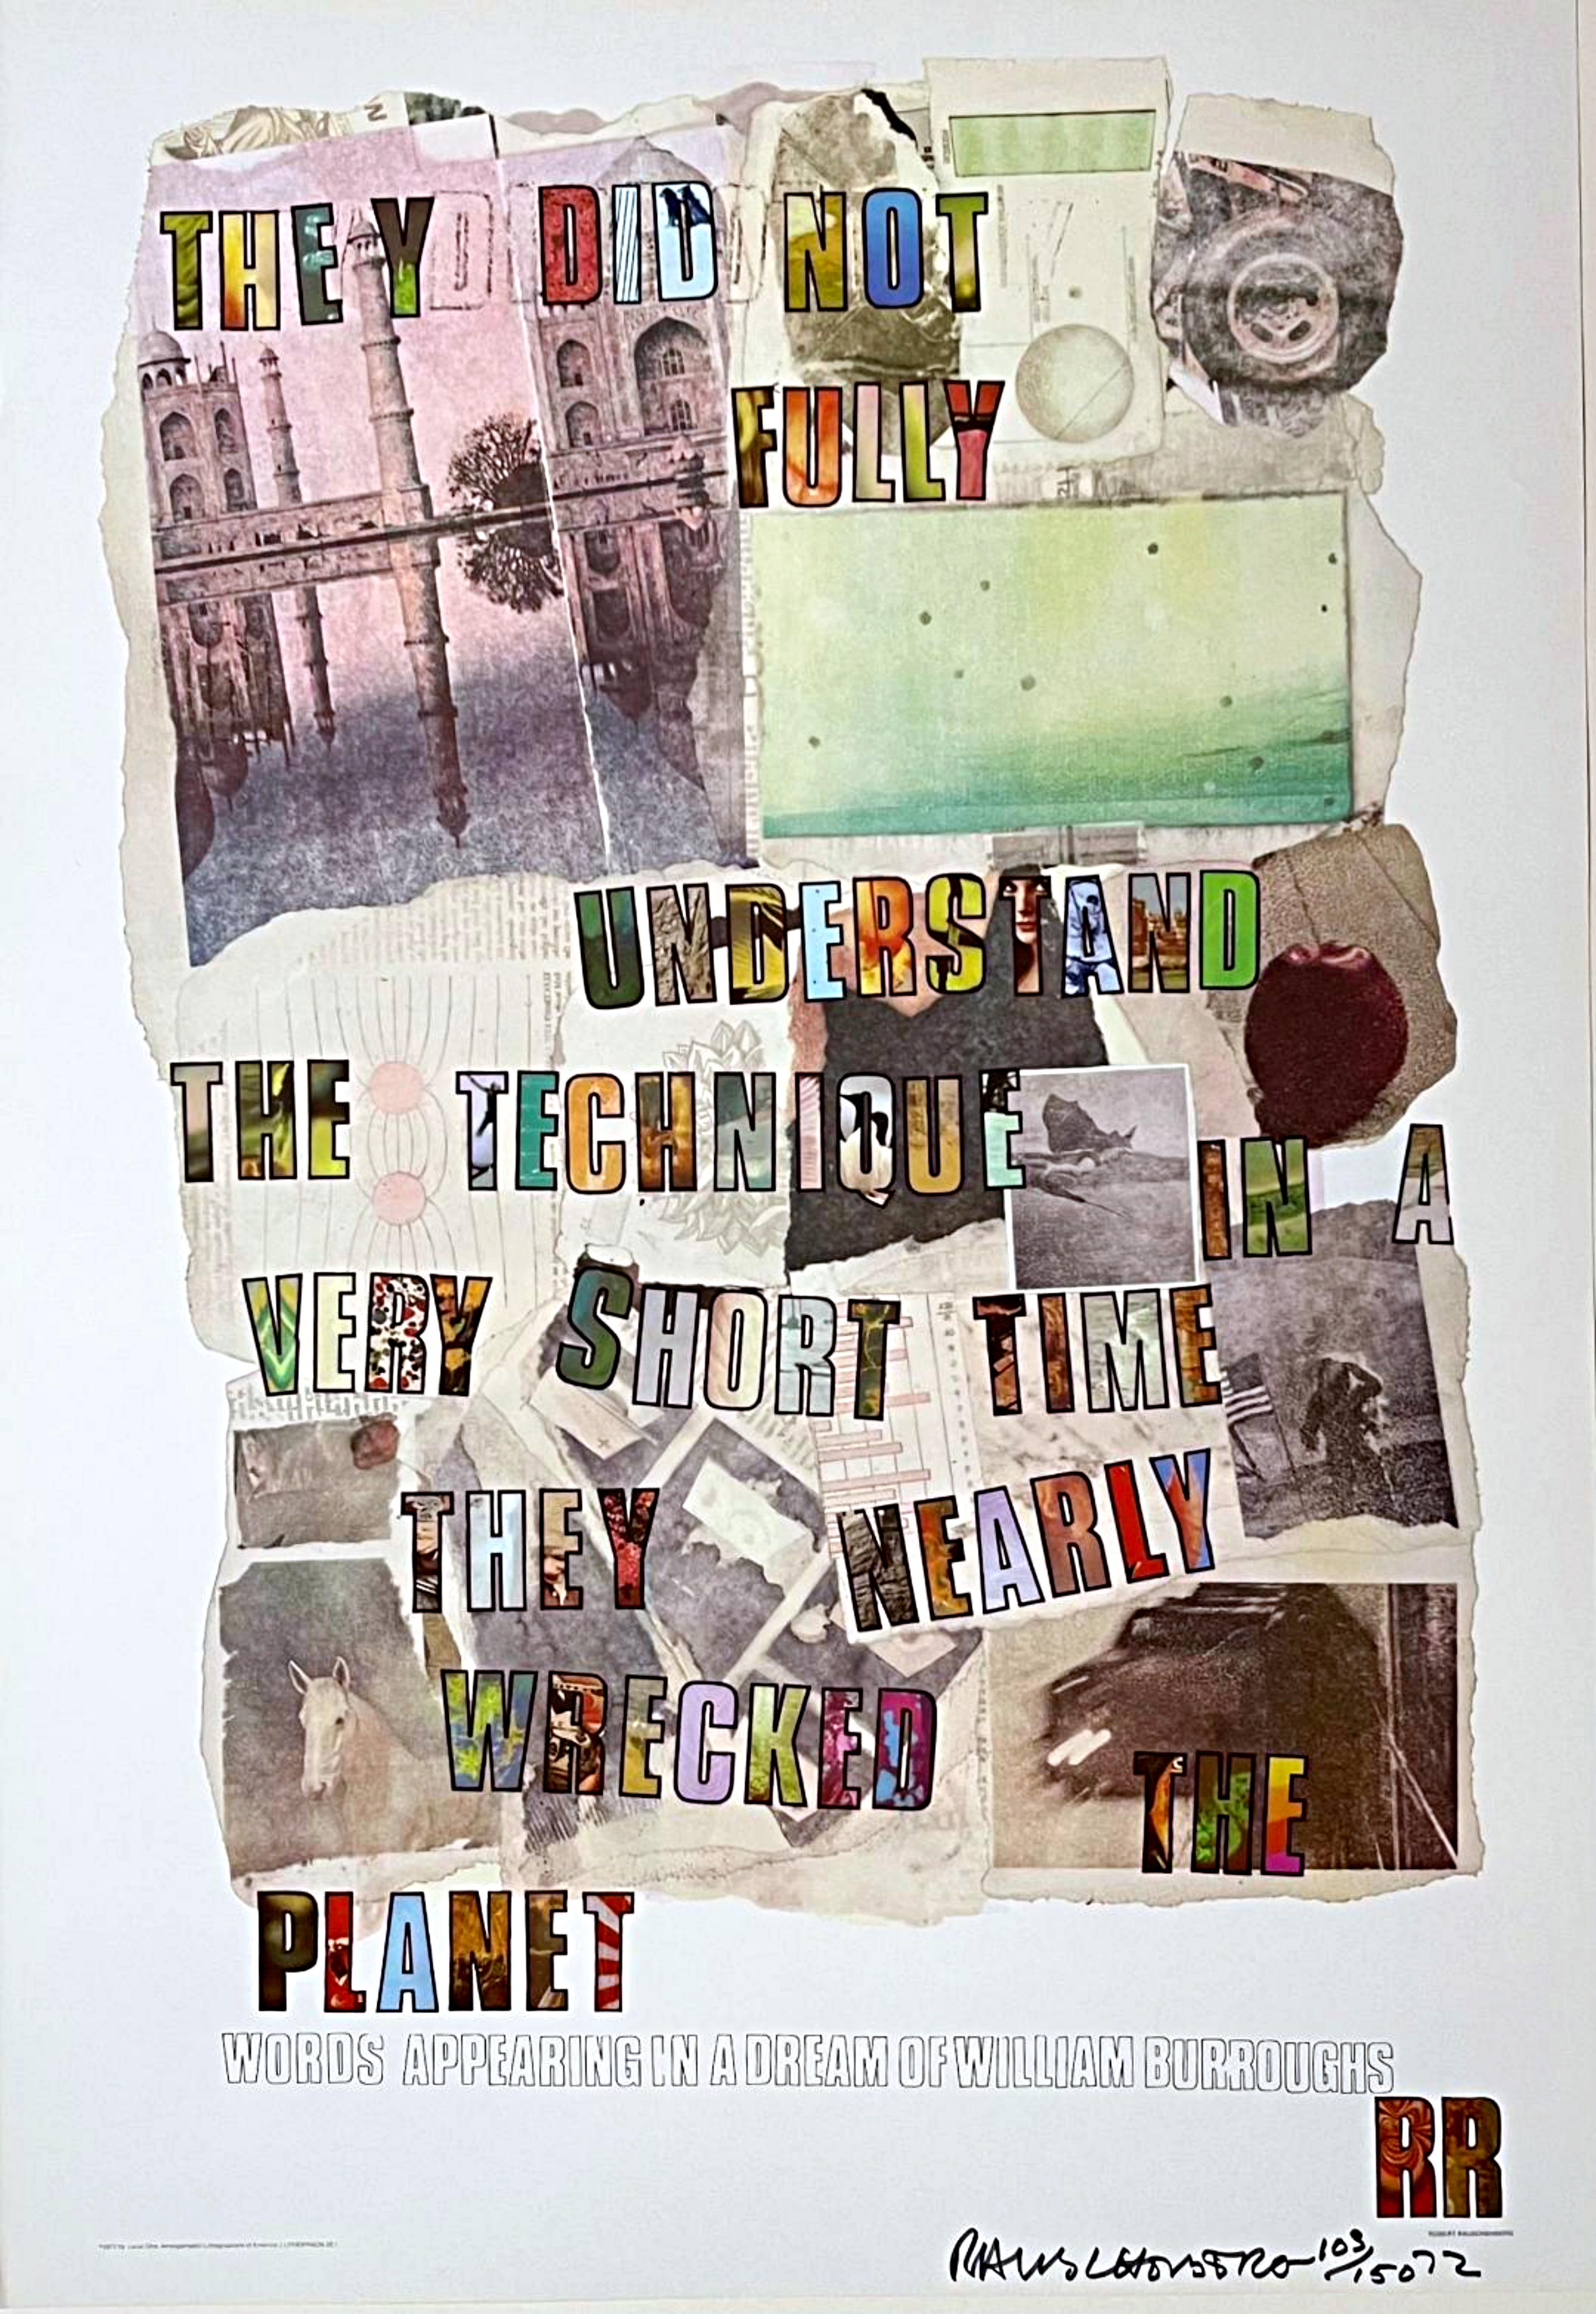 Robert Rauschenberg Print - Dream of William Burroughs (rare 1970s limited edition lithograph) for Earth Day